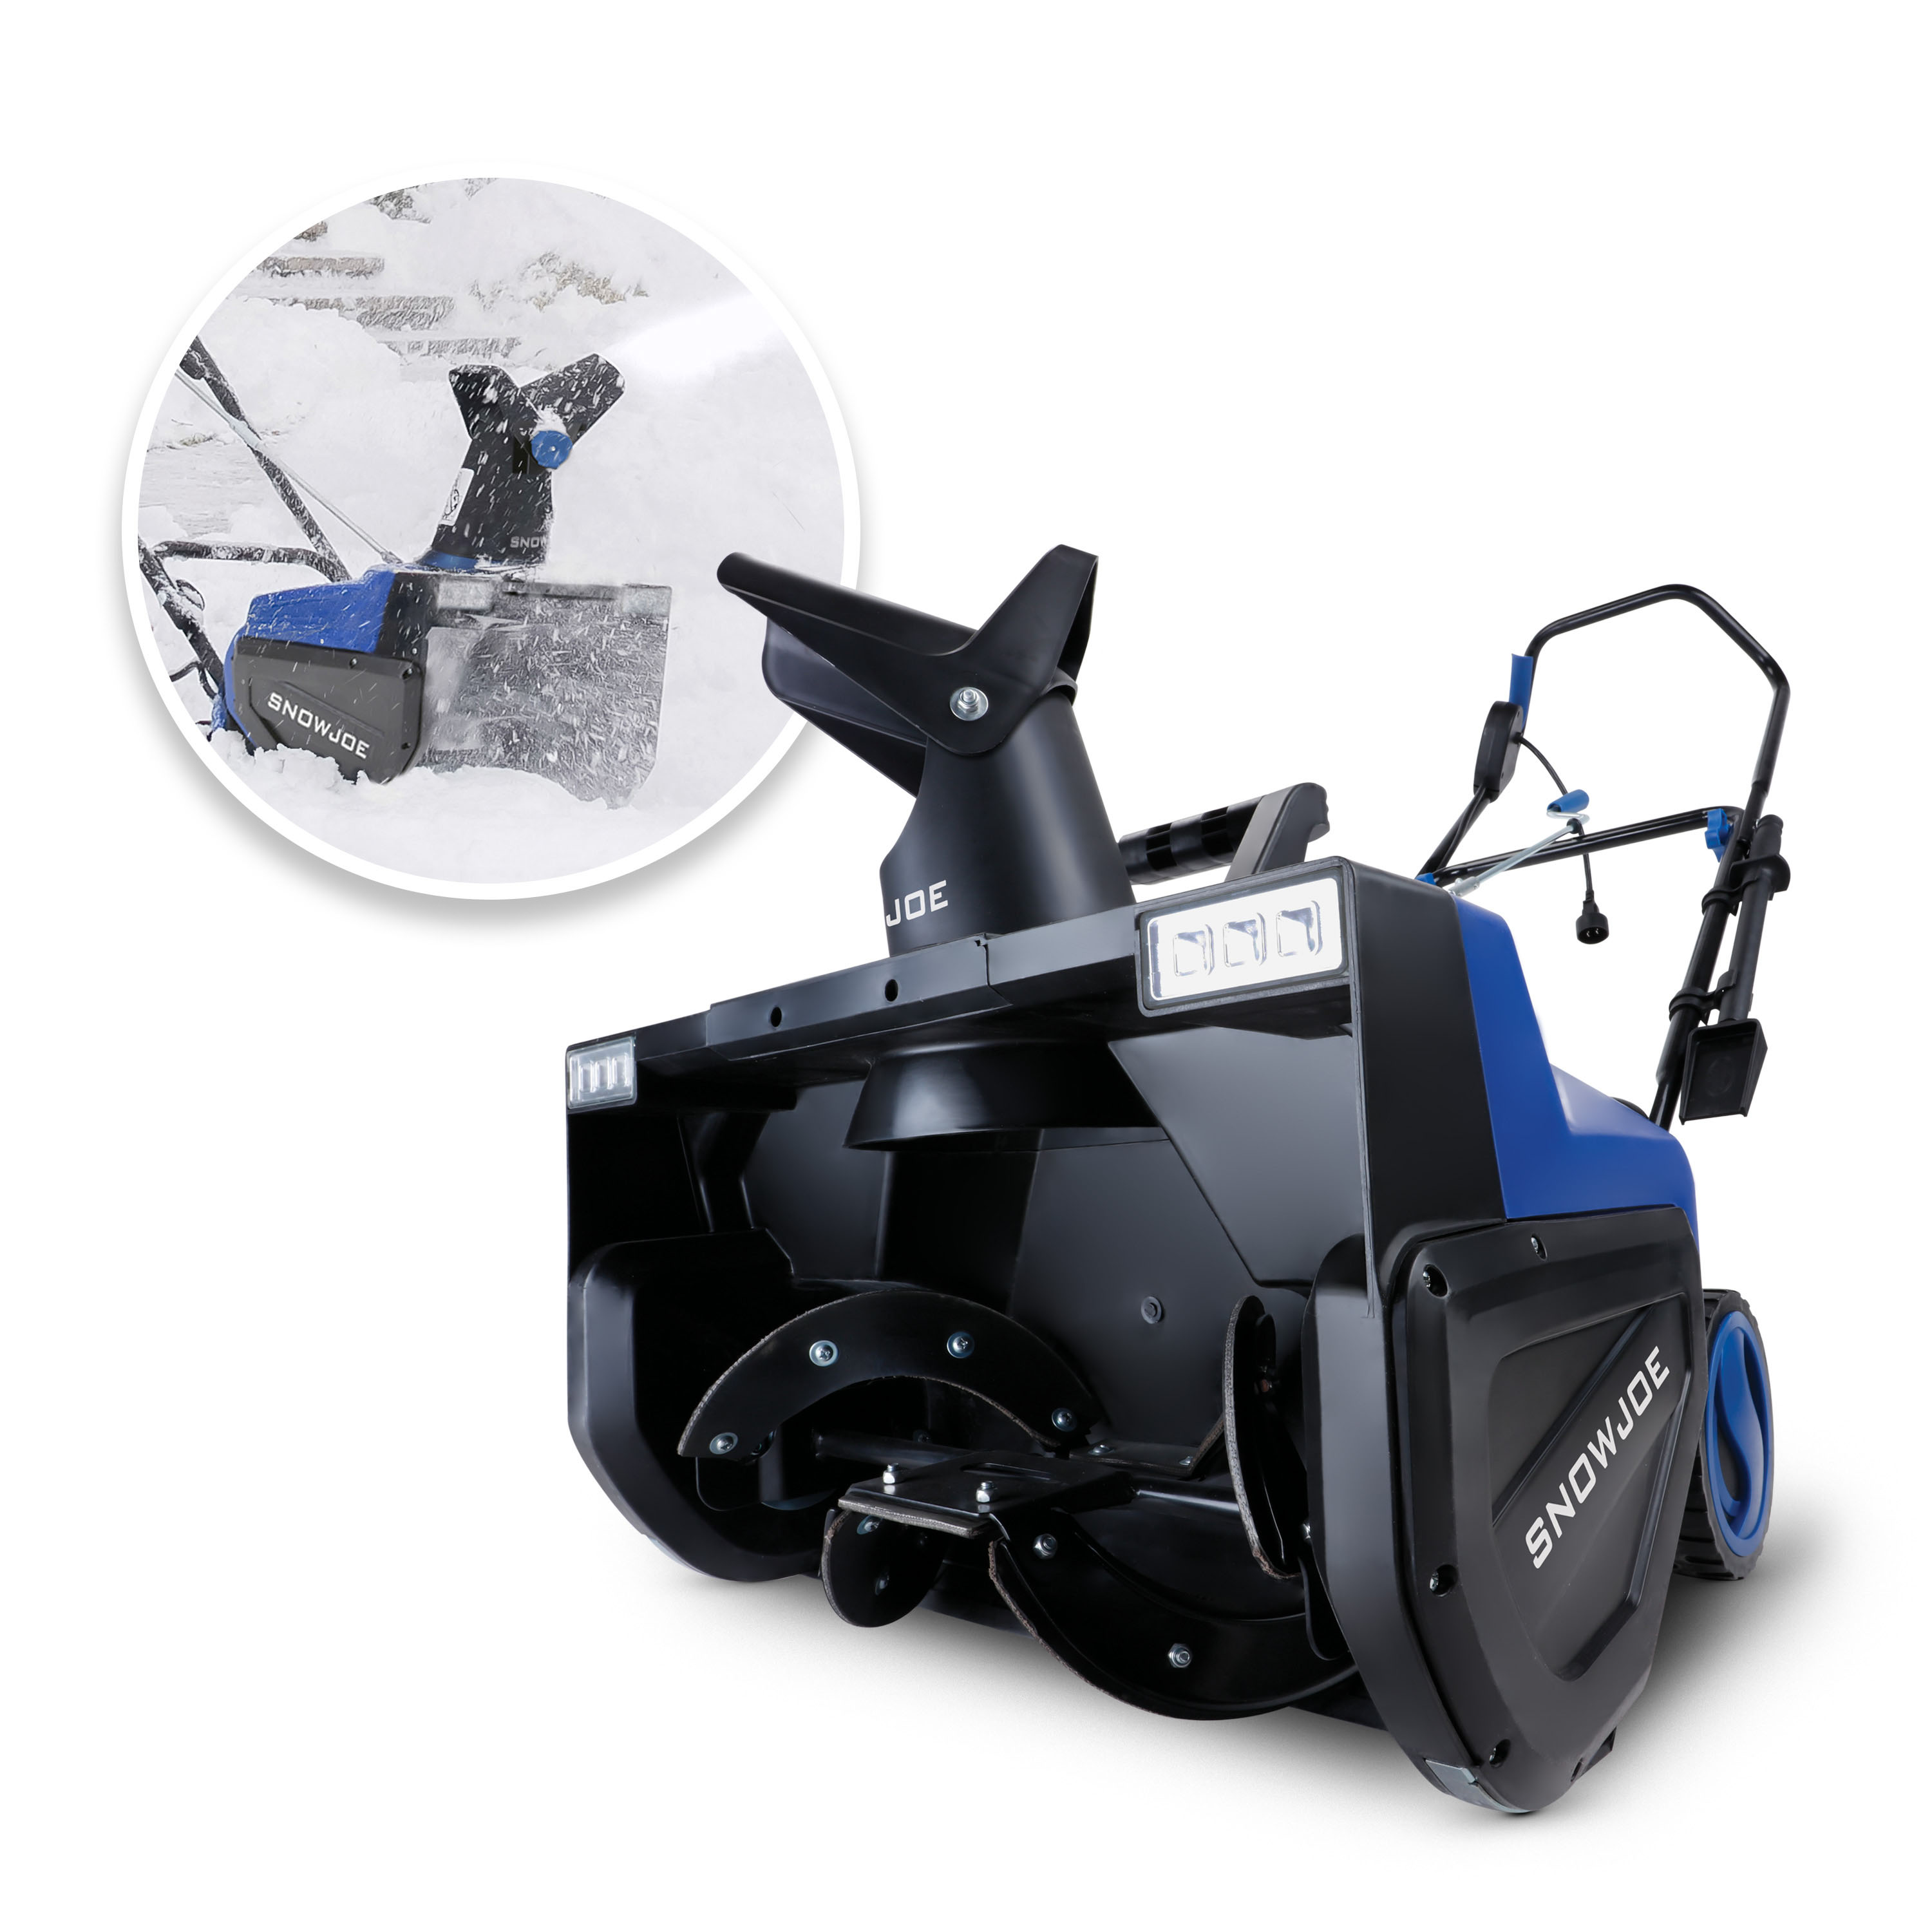 Snow Joe 22-inch Electric Single-Stage Snow Blower W/ Dual LED Lights, 15-Amp - image 1 of 16